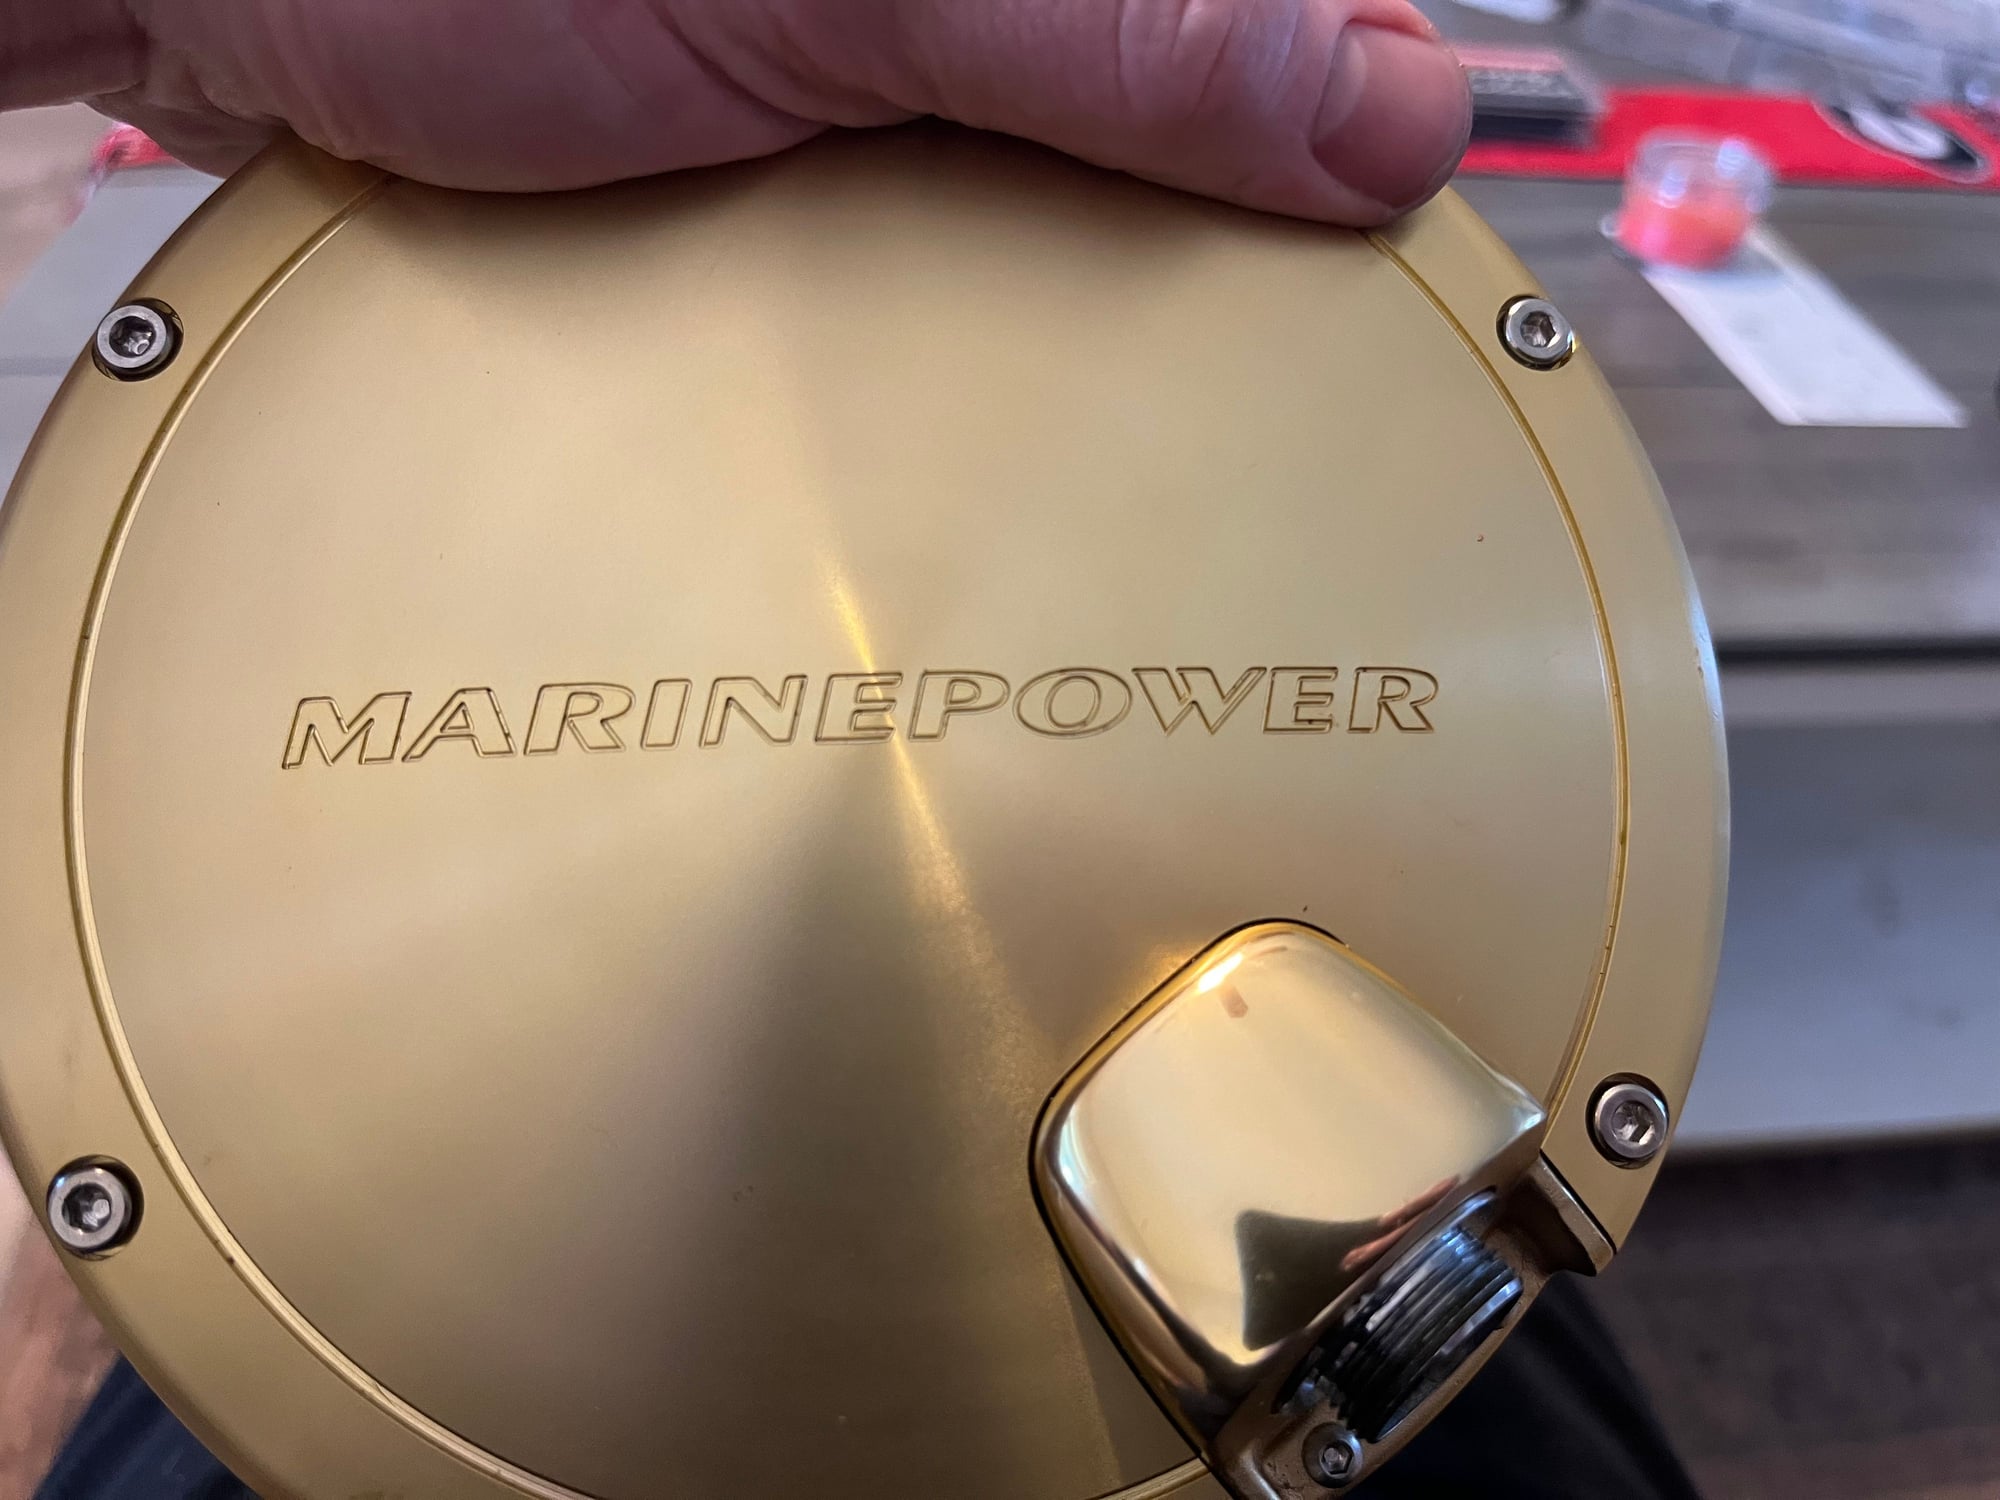 Daiwa marine power 3000 for sale - The Hull Truth - Boating and Fishing  Forum